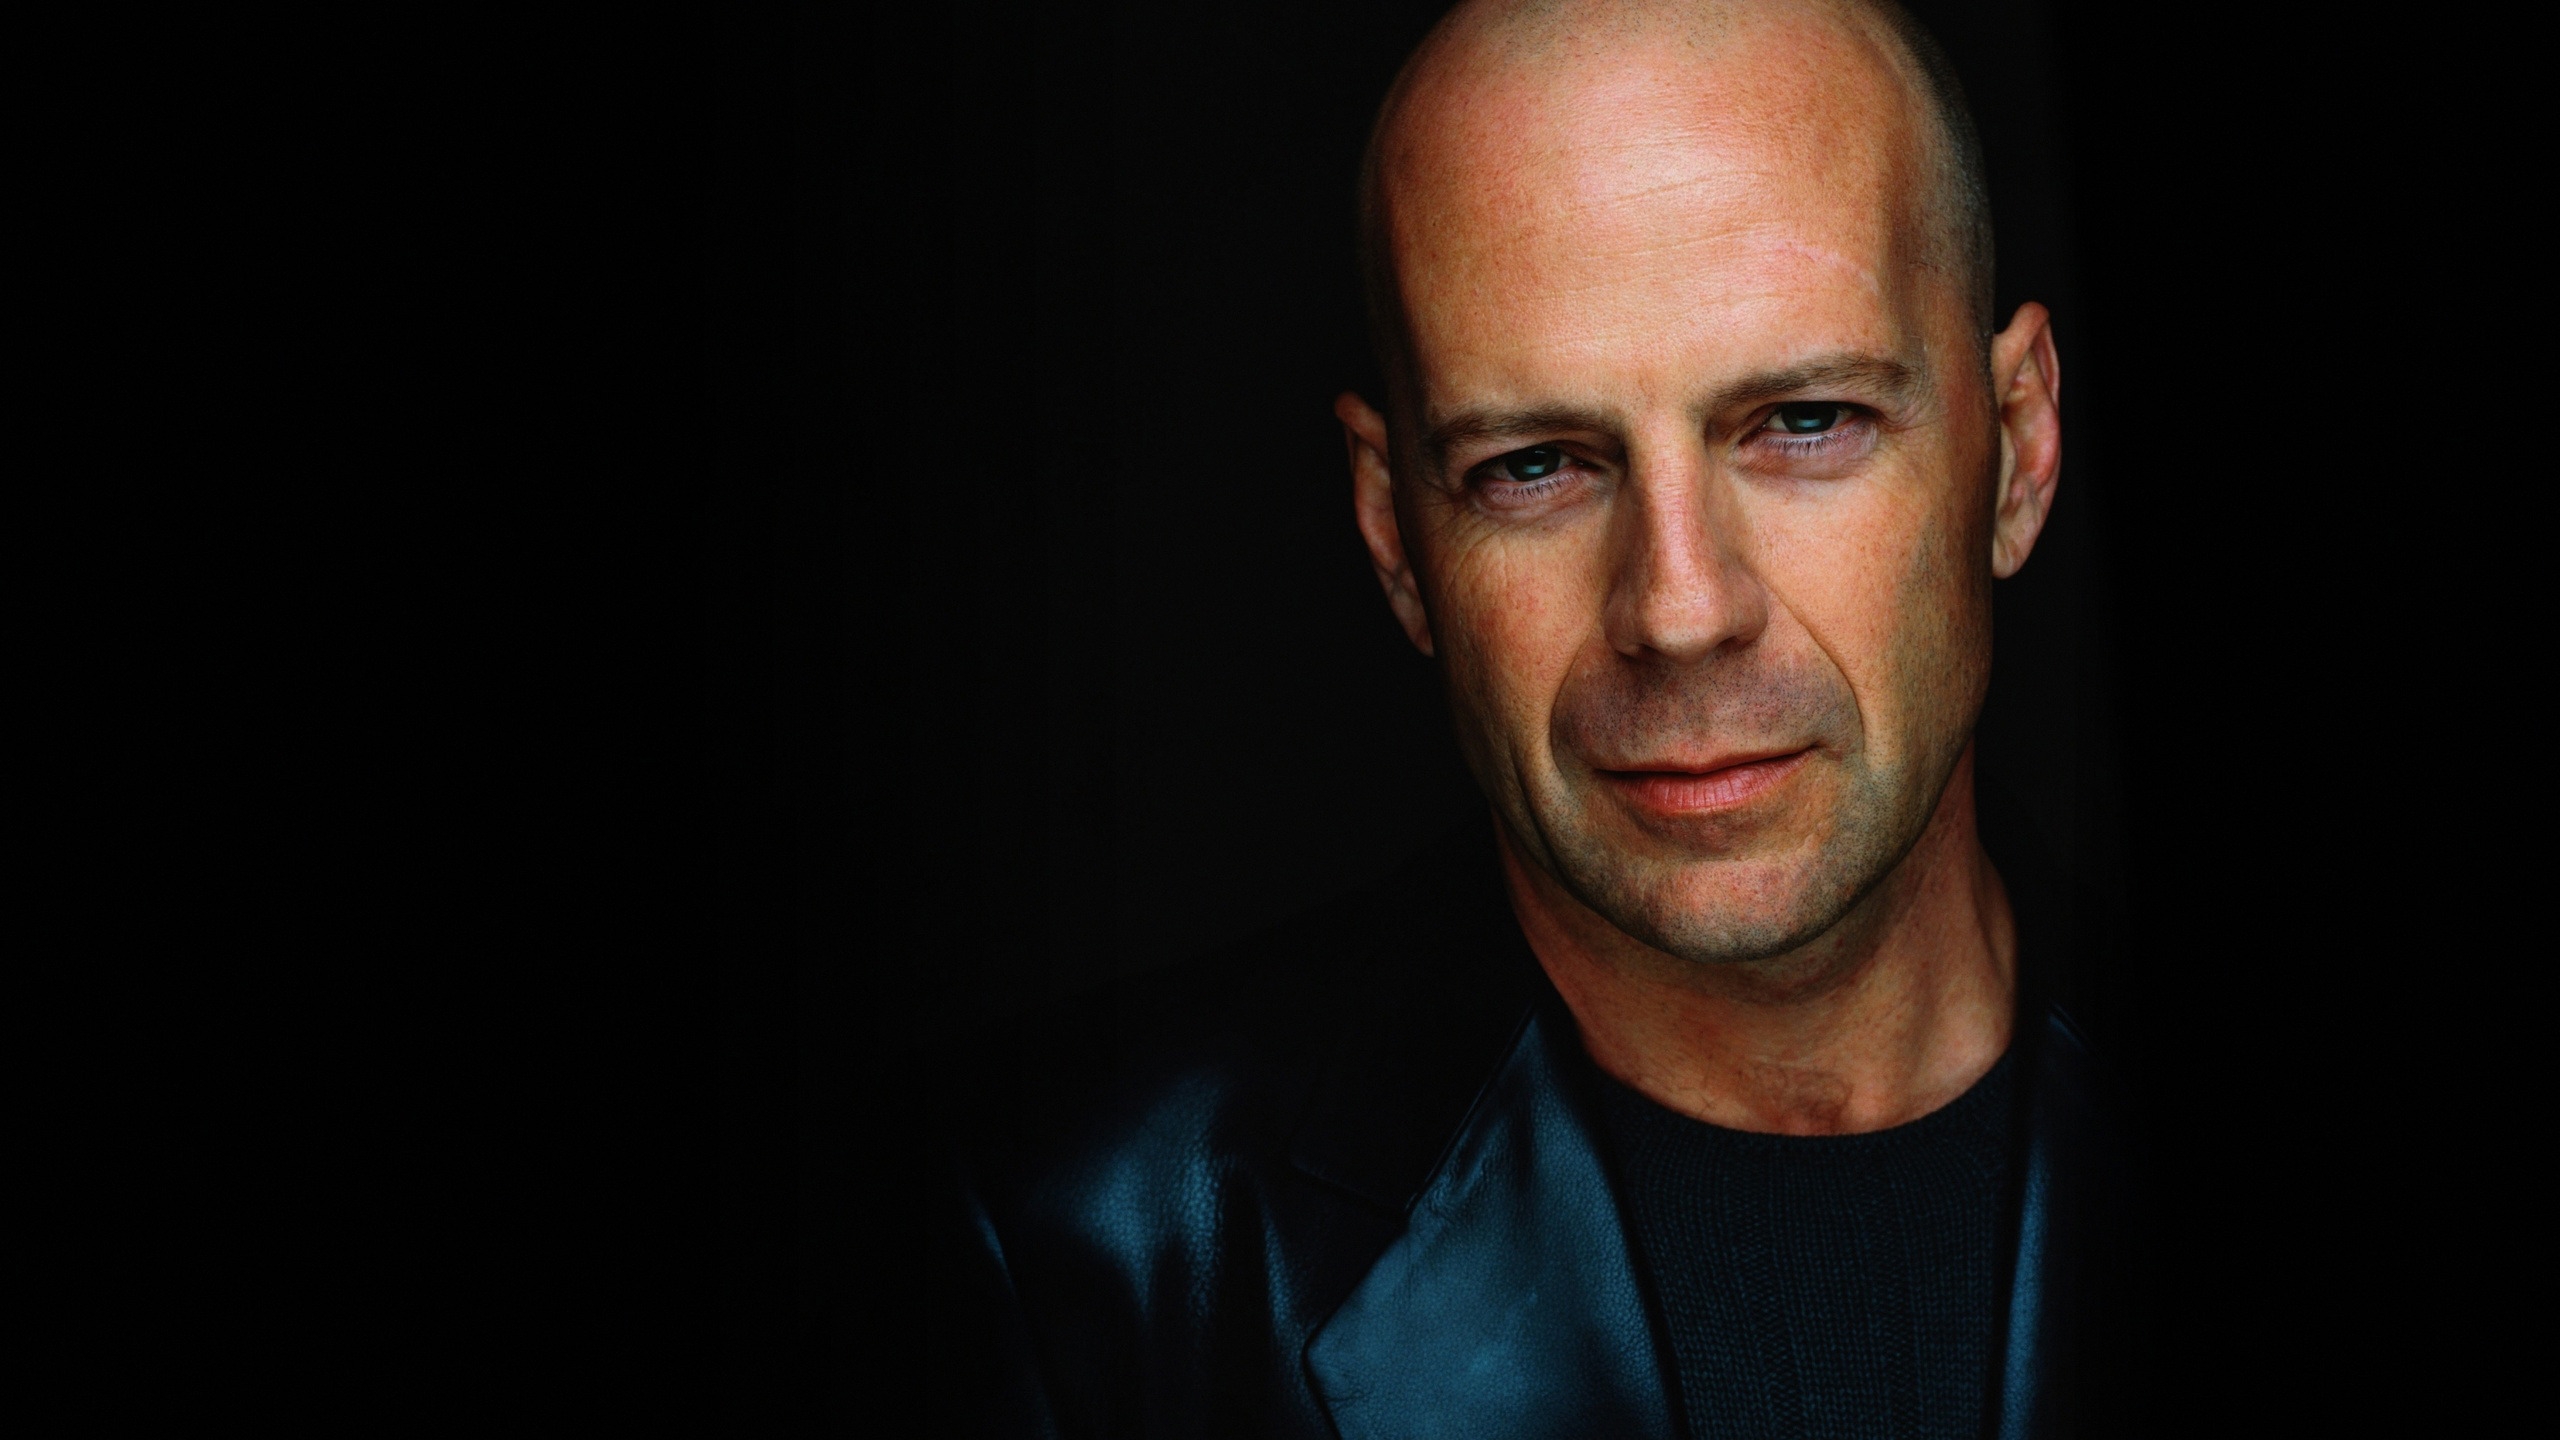 Bruce Willis Profile Look for 2560x1440 HDTV resolution